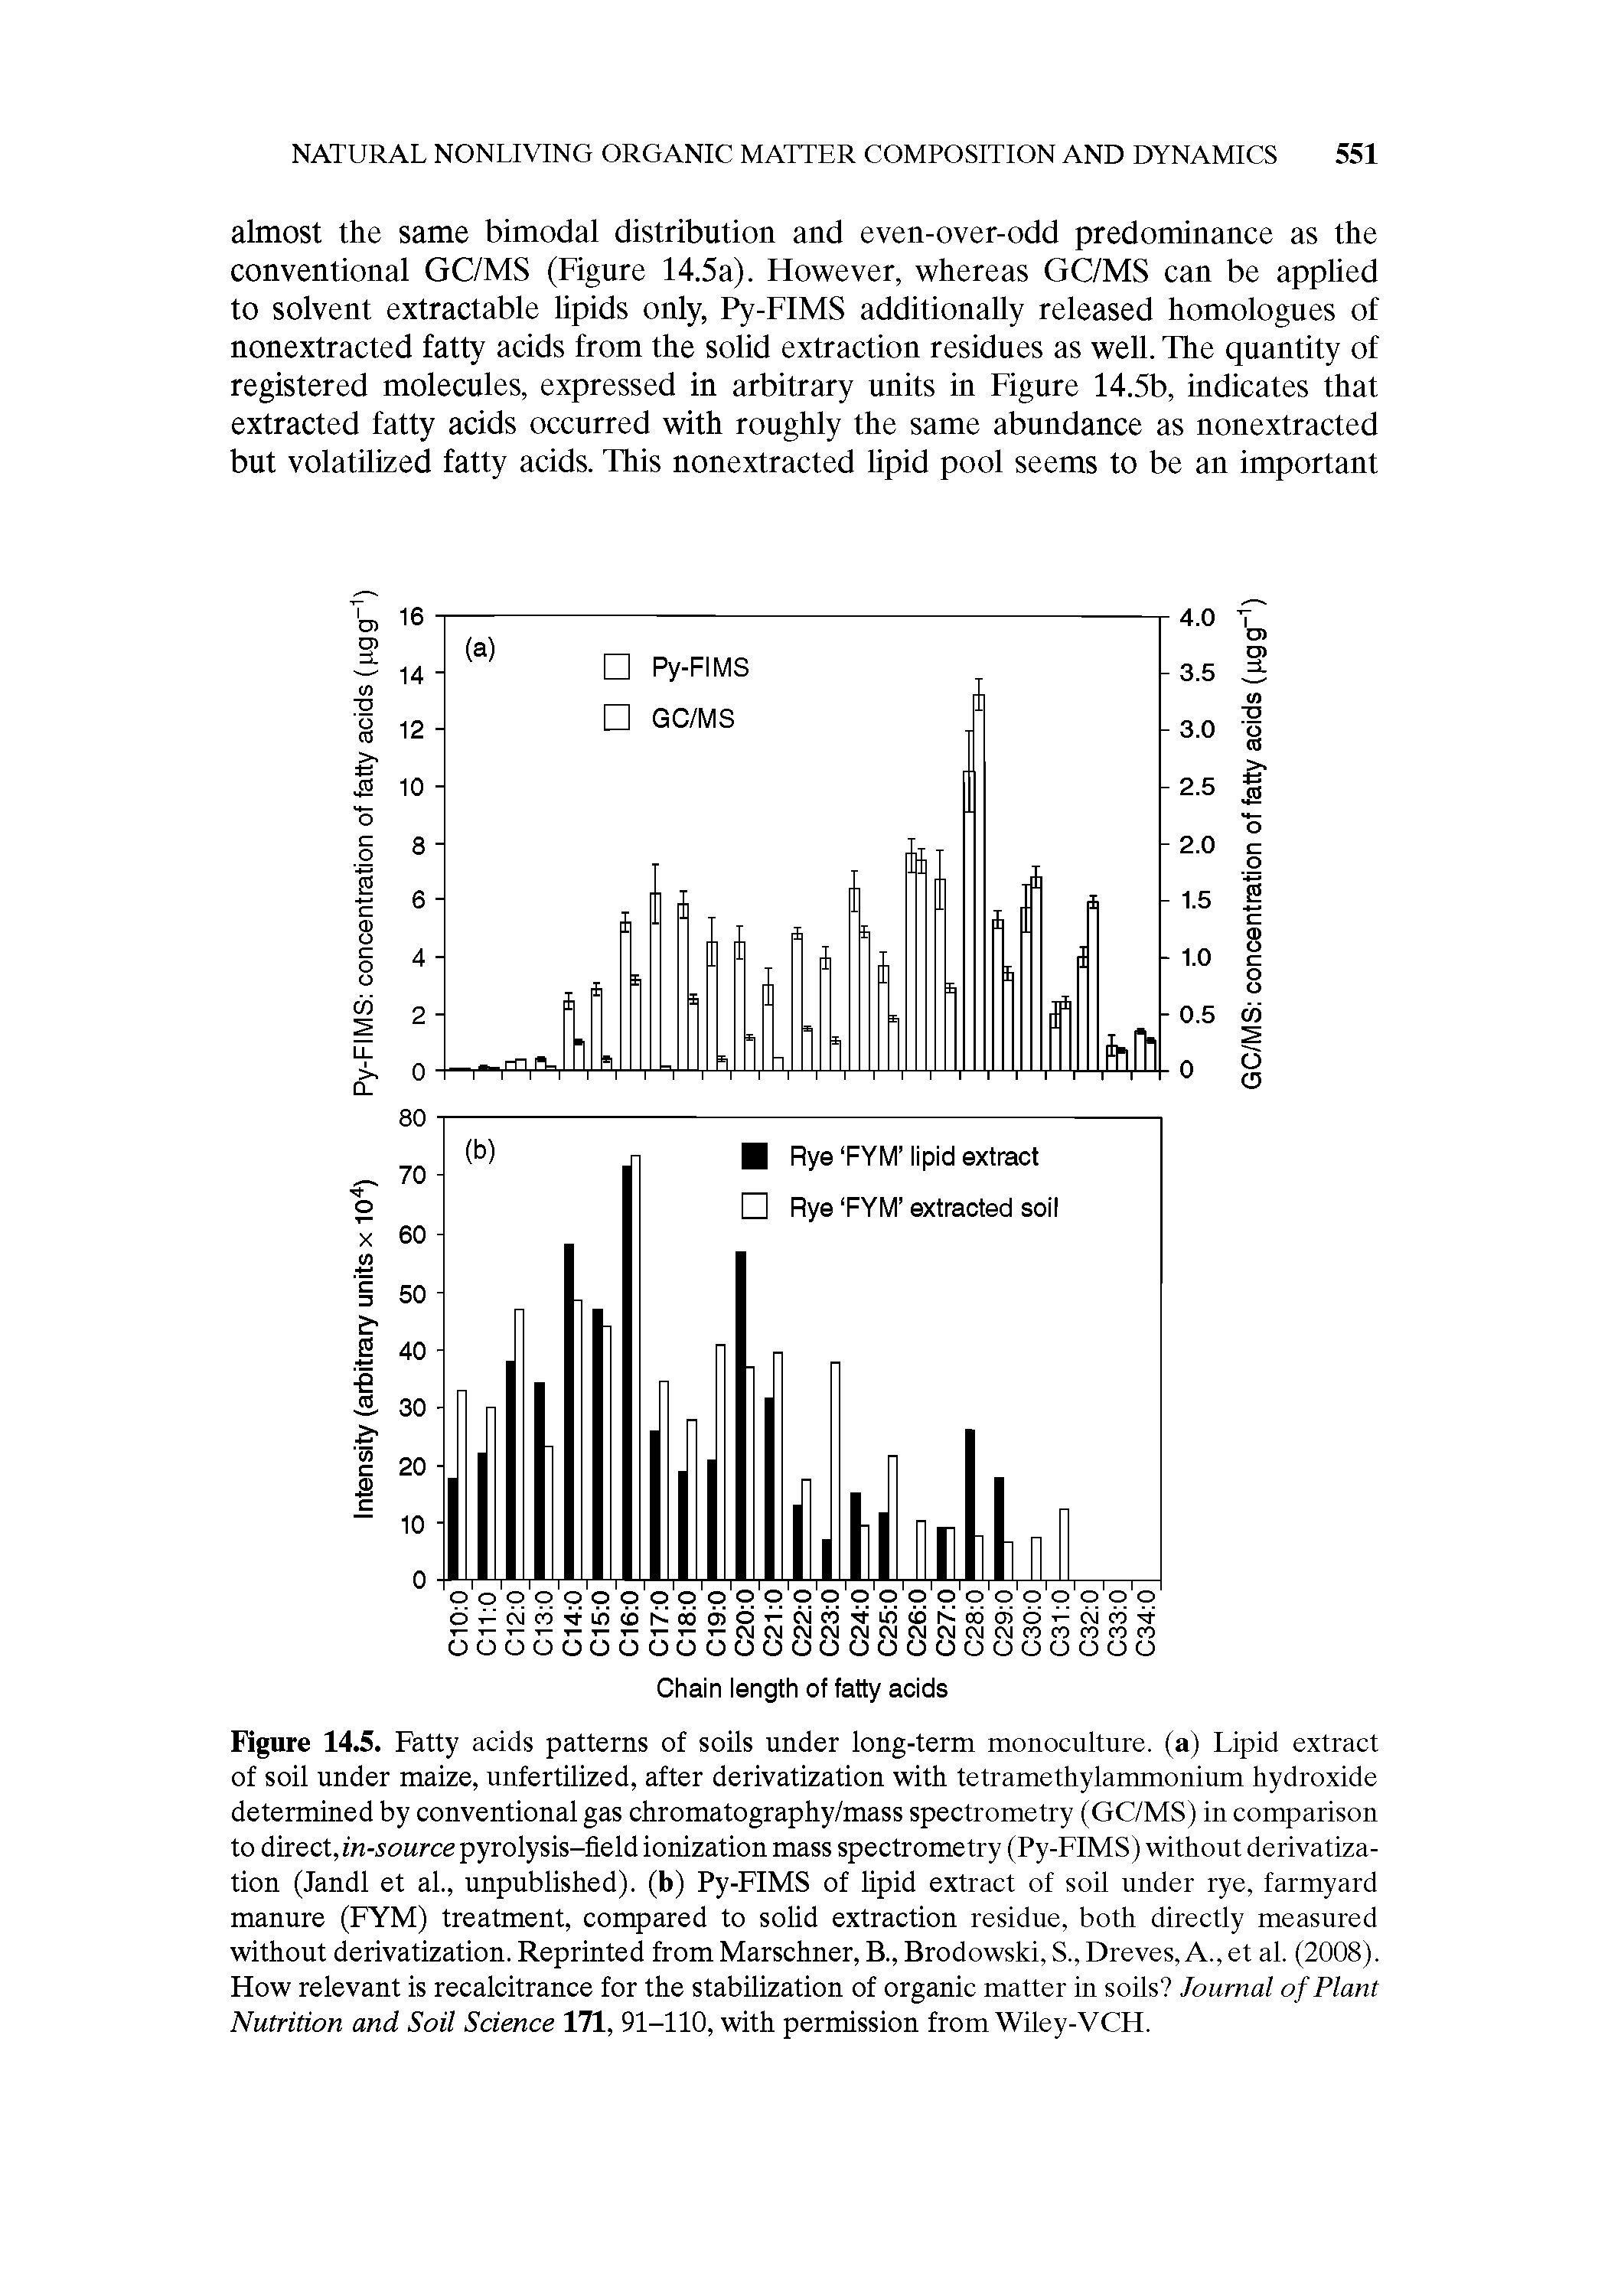 Figure 14.5. Fatty acids patterns of soils under long-term monoculture, (a) Lipid extract of soil under maize, unfertilized, after derivatization with tetramethylammonium hydroxide determined by conventional gas chromatography/mass spectrometry (GC/MS) in comparison to direct, in-source pyrolysis-field ionization mass spectrometry (Py-FIMS) without derivatization (Jandl et al., unpublished), (b) Py-FIMS of lipid extract of soil under rye, farmyard manure (FYM) treatment, compared to solid extraction residue, both directly measured without derivatization. Reprinted from Marschner, B., Brodowski, S., Dreves, A., et al. (2008). How relevant is recalcitrance for the stabilization of organic matter in soils Journal of Plant Nutrition and Soil Science 171, 91-110, with permission from Wiley-VCH.